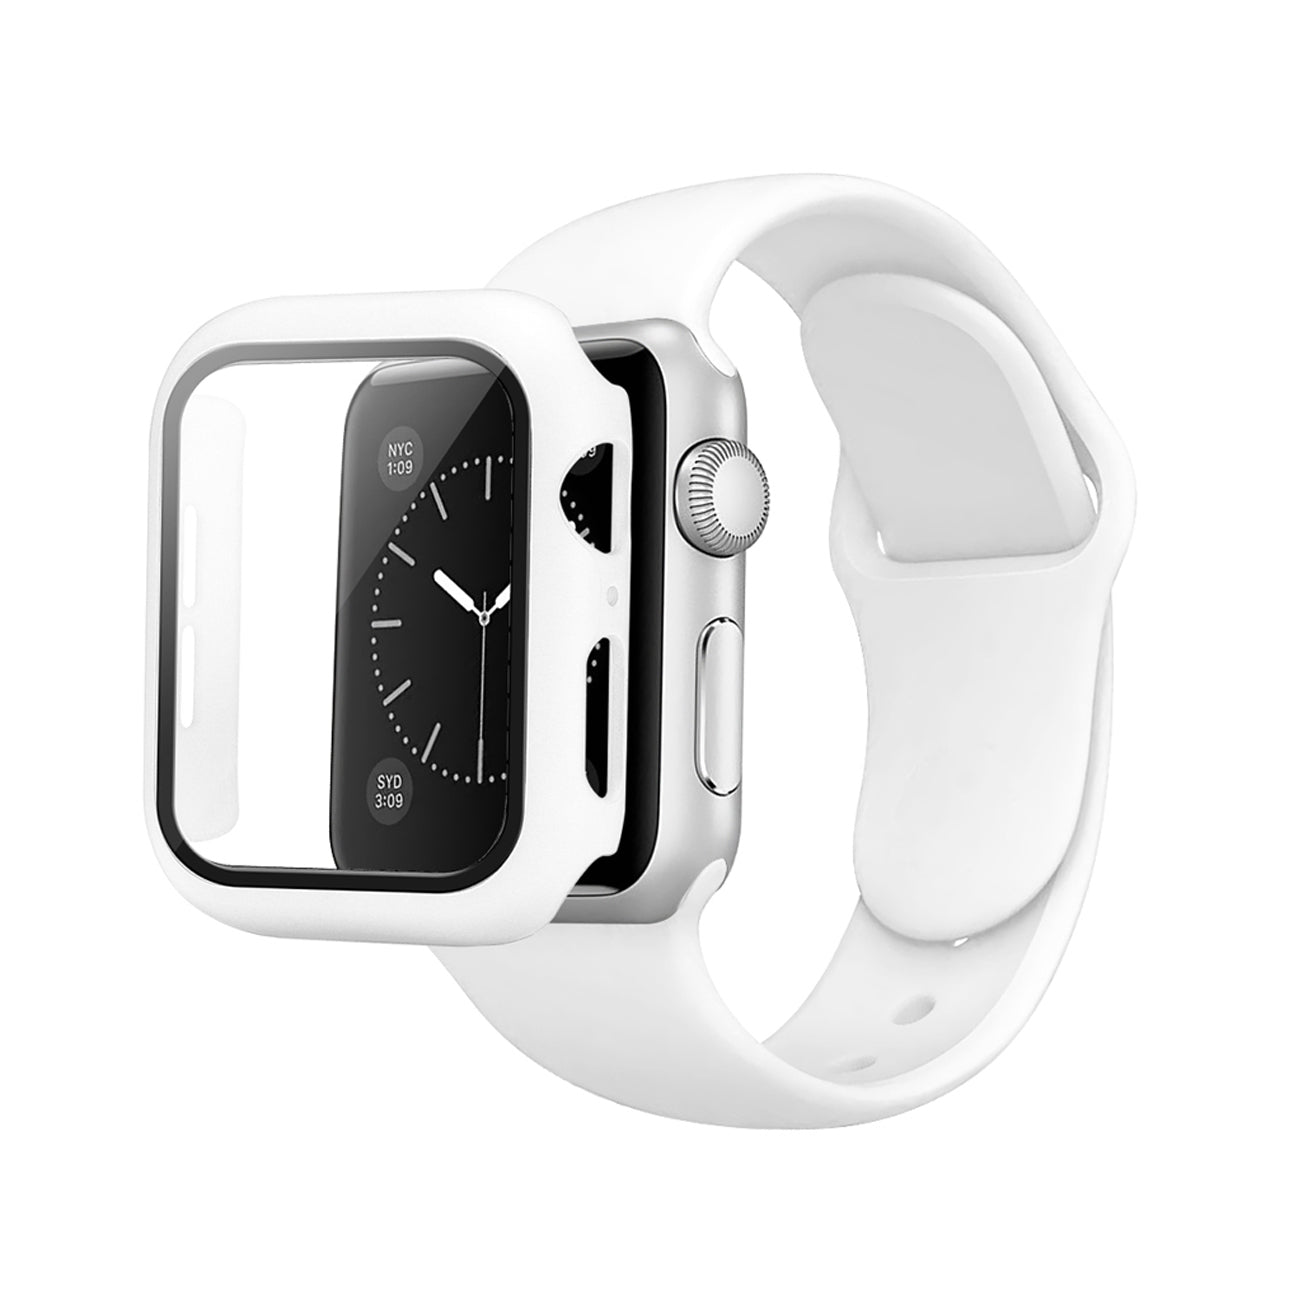 Watch Case PC With Glass Screen Protector, Silicone Watch Band Apple Watch 38mm White Color